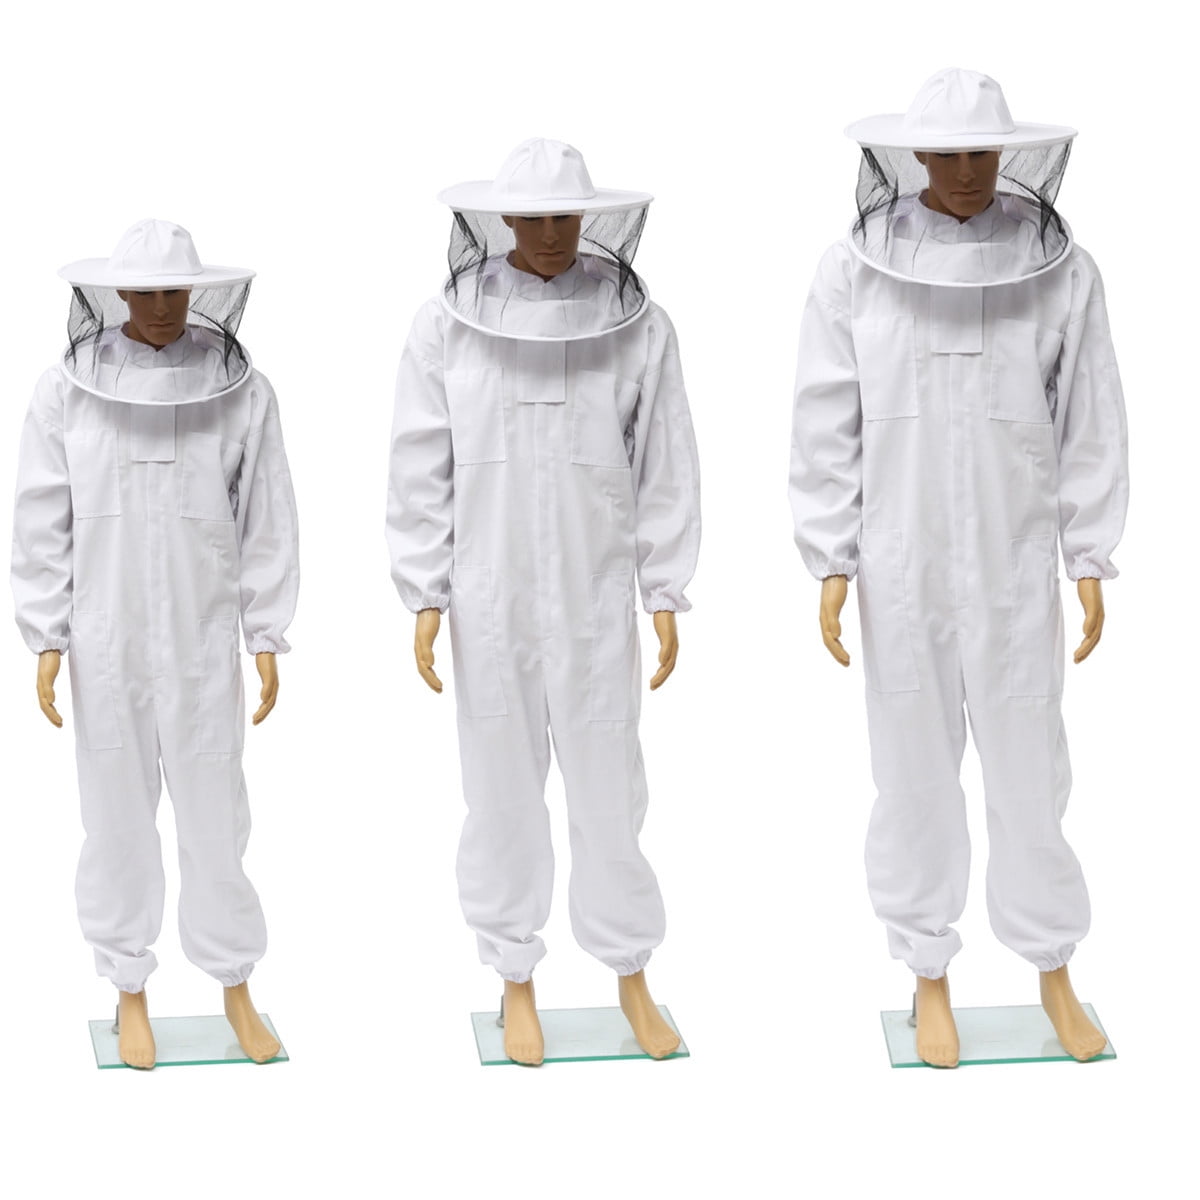 3XL Beekeeper Protect Bee Keeping Suit Jacket Safty Veil Hat Body Equipment NEW 